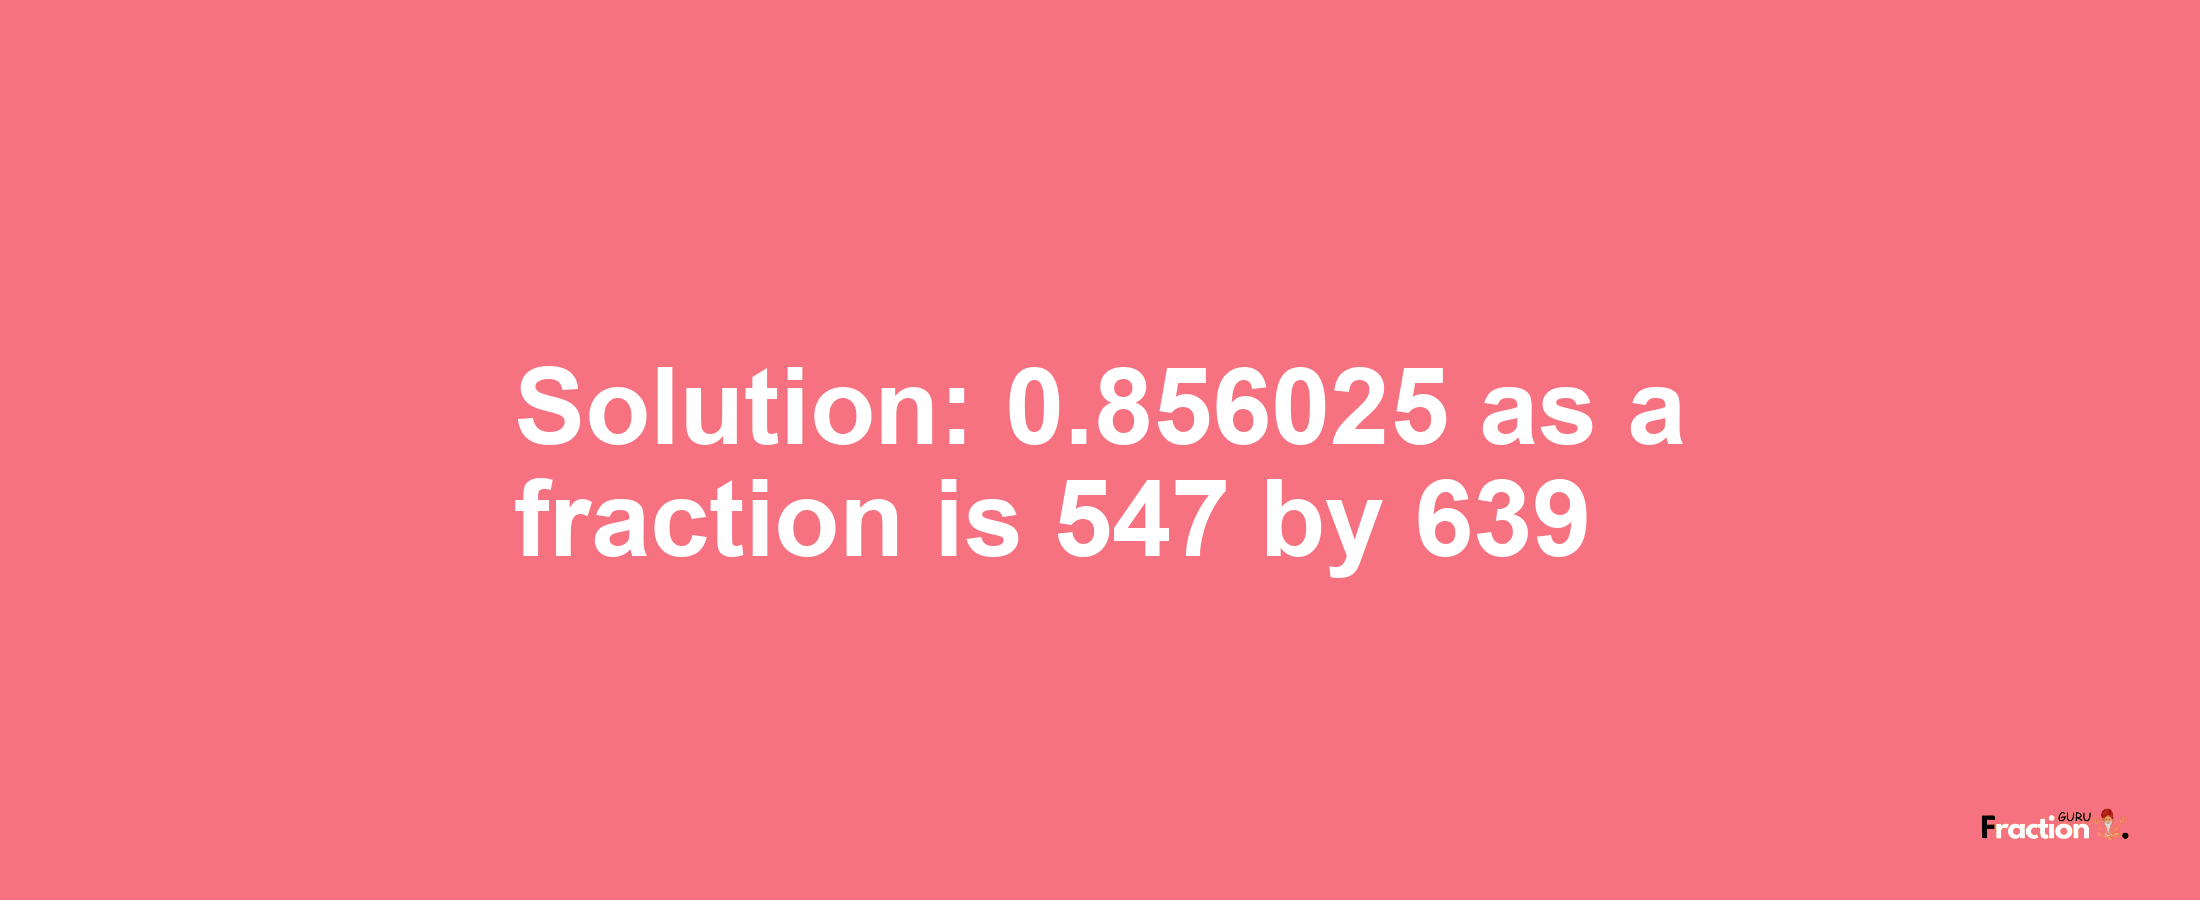 Solution:0.856025 as a fraction is 547/639